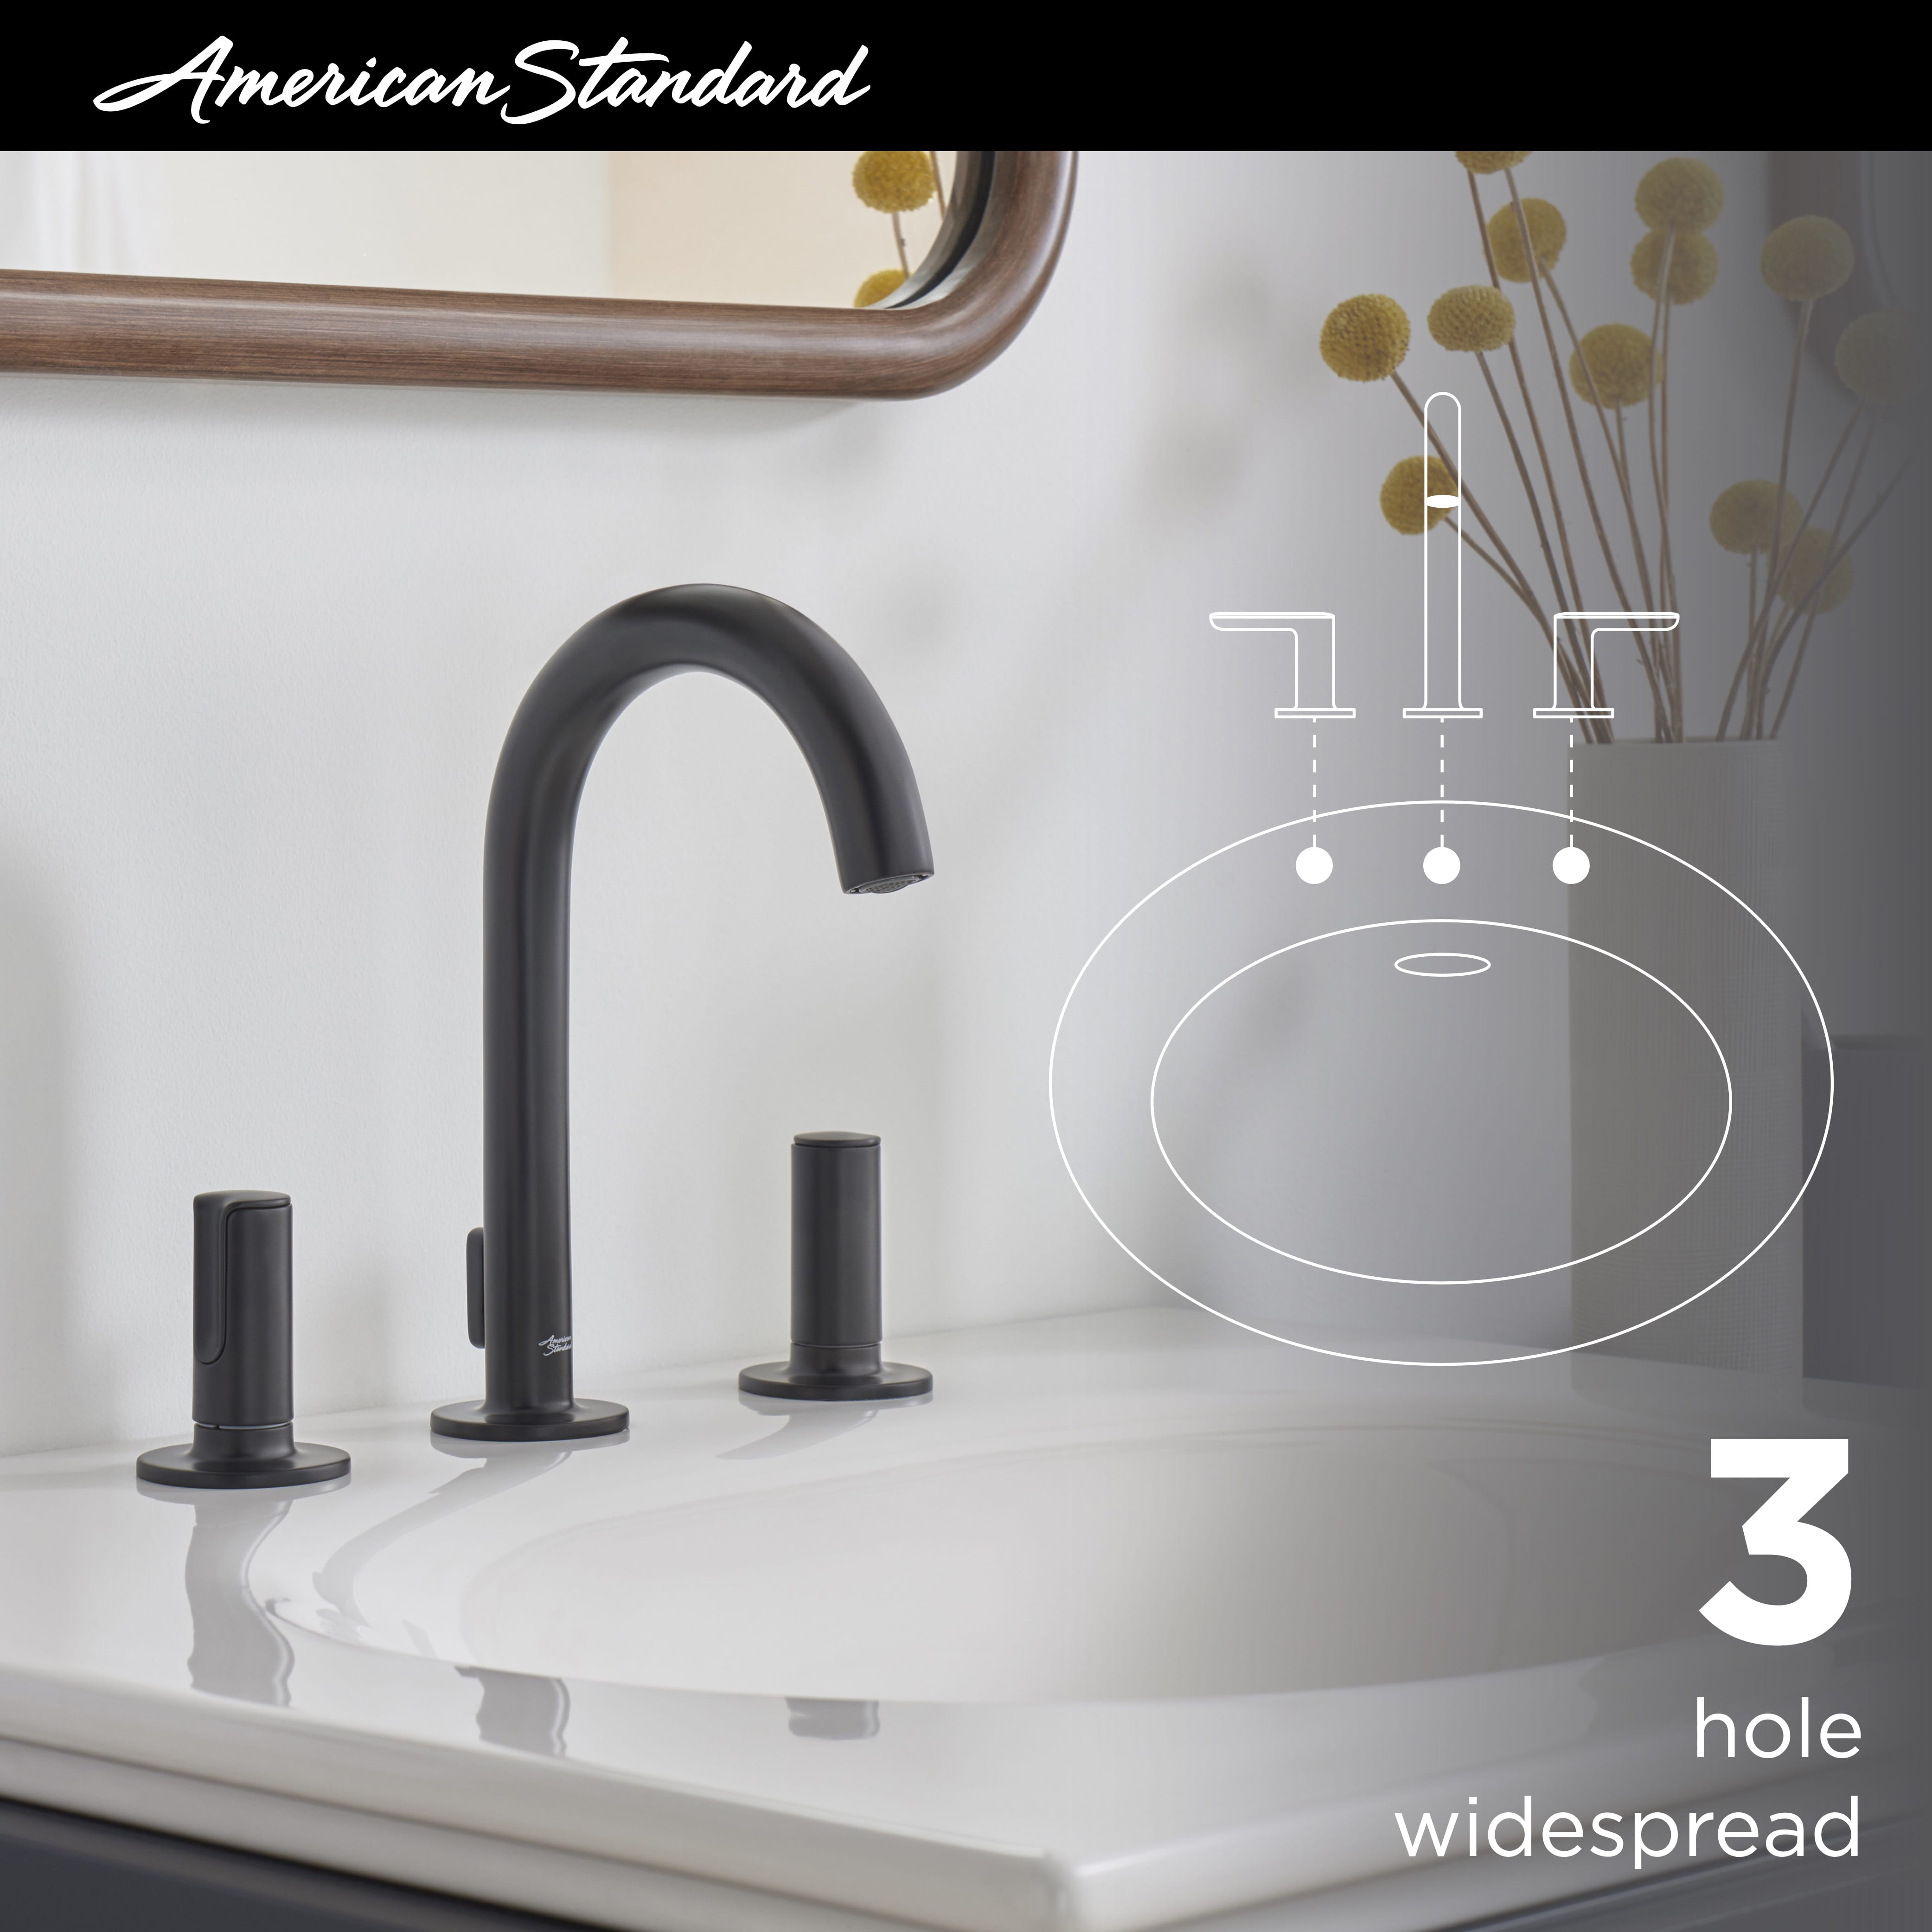 Studio S 8 Inch Widespread 2 Handle Bathroom Faucet 12 gpm 45 L min With Lever Handles BRUSHED NICKEL